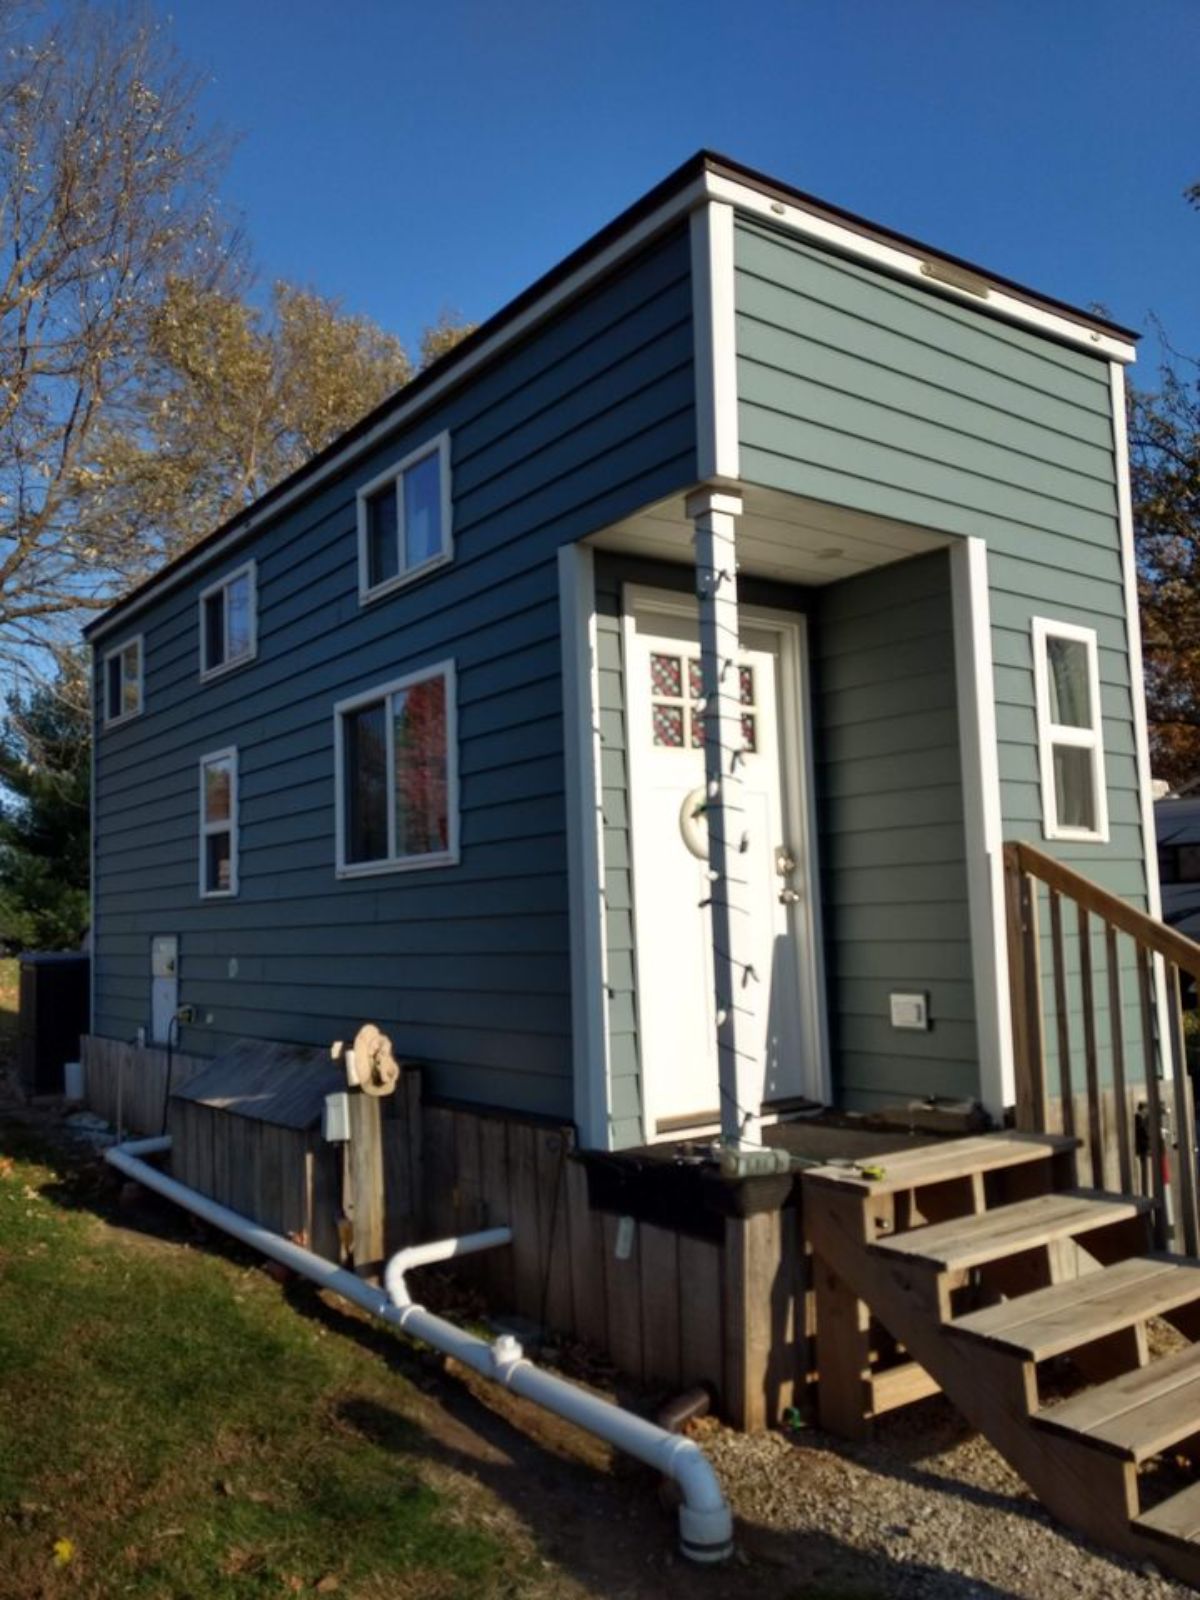 Exterior of of 196 sf Tiny House on Wheels